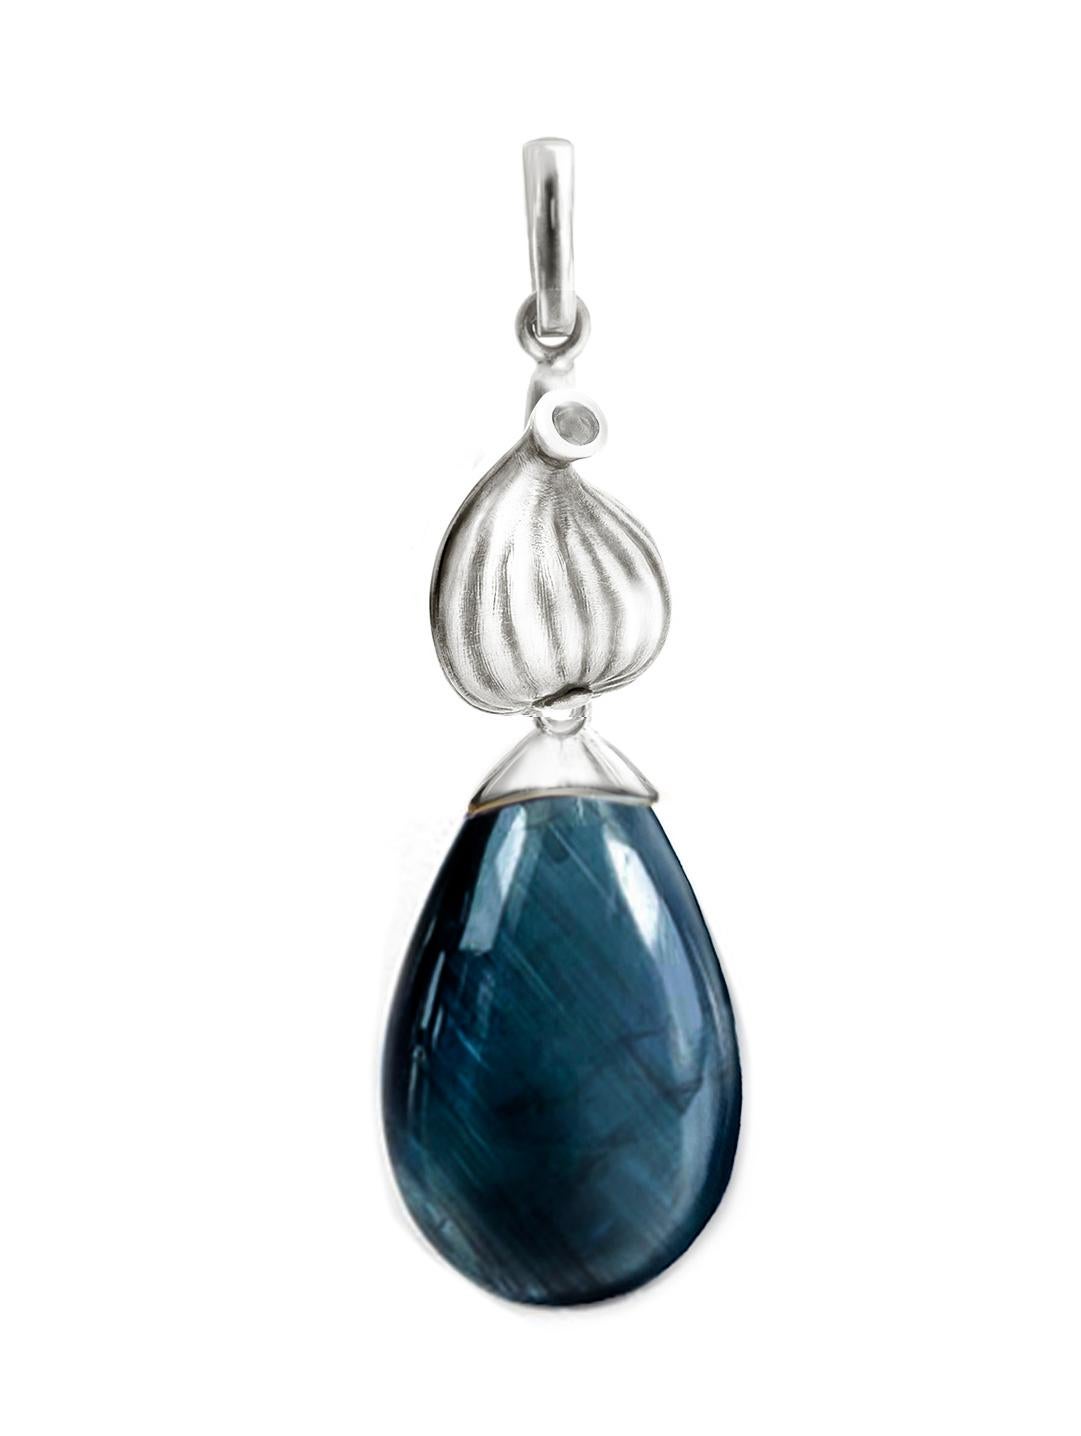 These contemporary drop earrings are made of 18 karat white gold with natural vivid Indicolite tourmalines (17.5x10.5x6 mm each, 18.7 carats in total) and round diamonds. The Fig collection was featured in Vogue UA review. They are designed by the